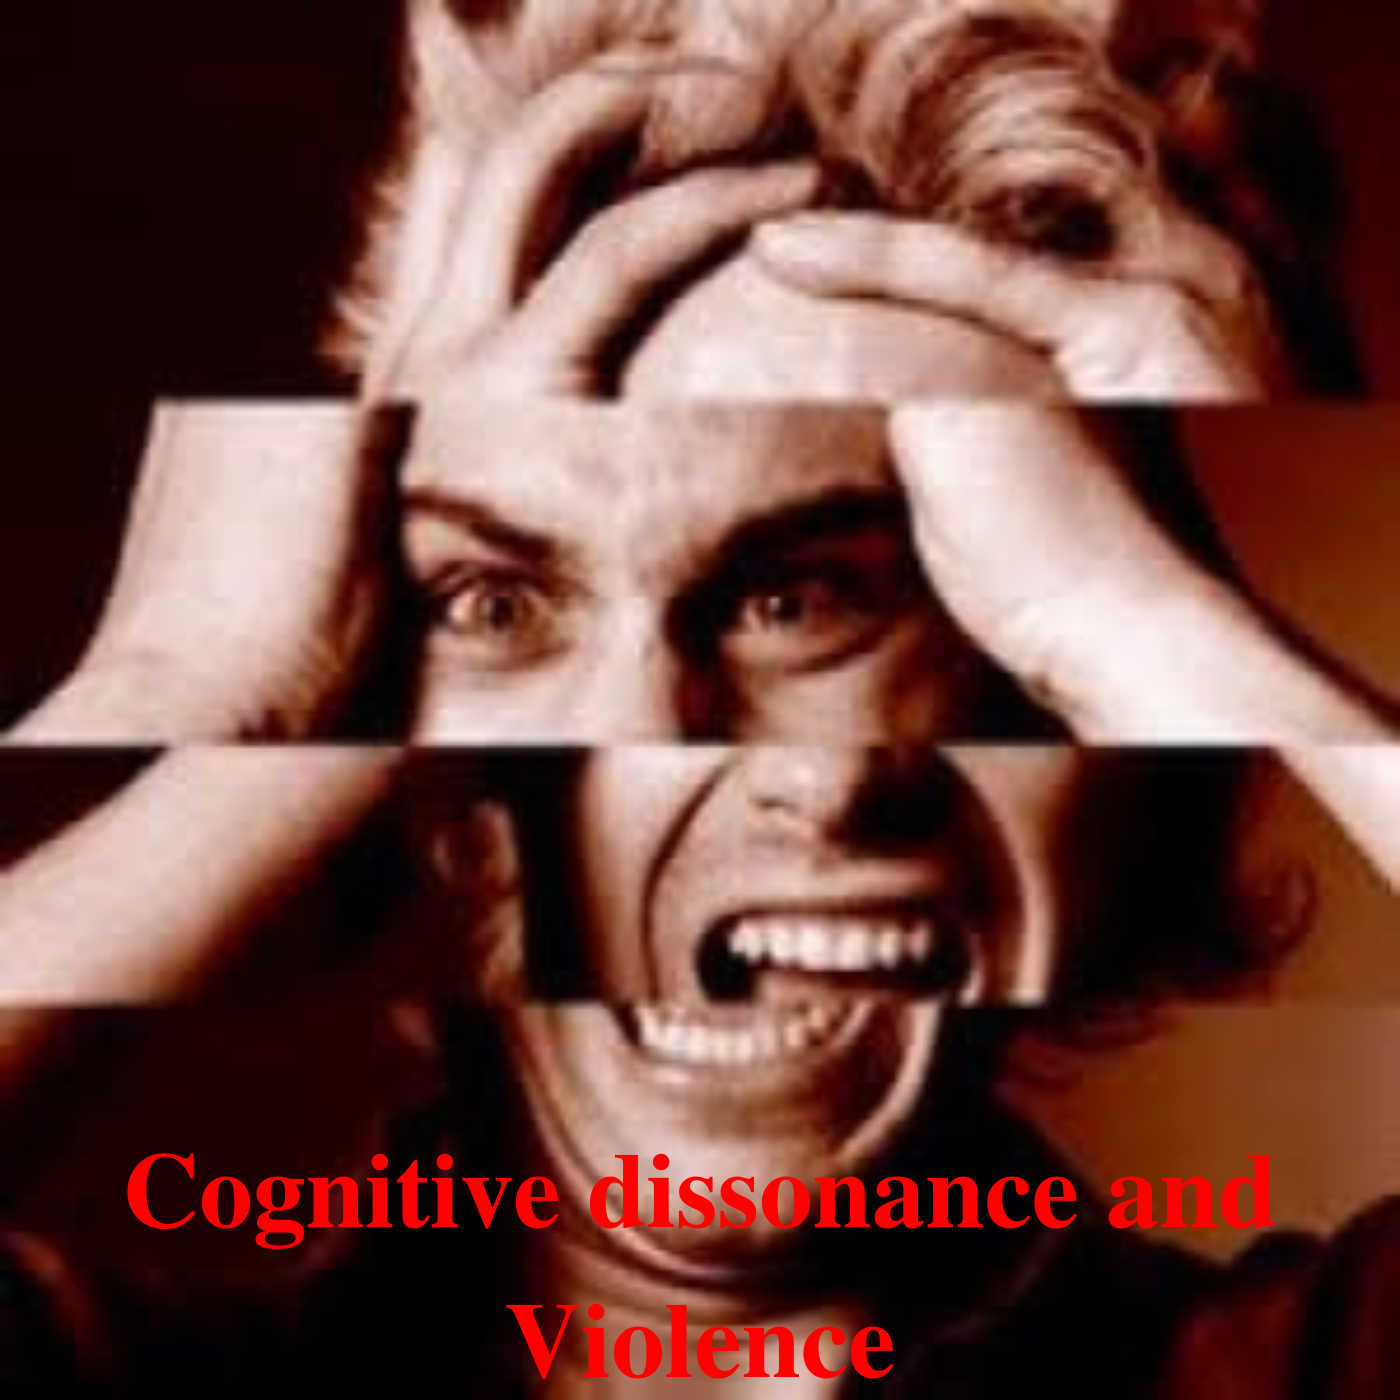 Cognitive dissonance and Violence